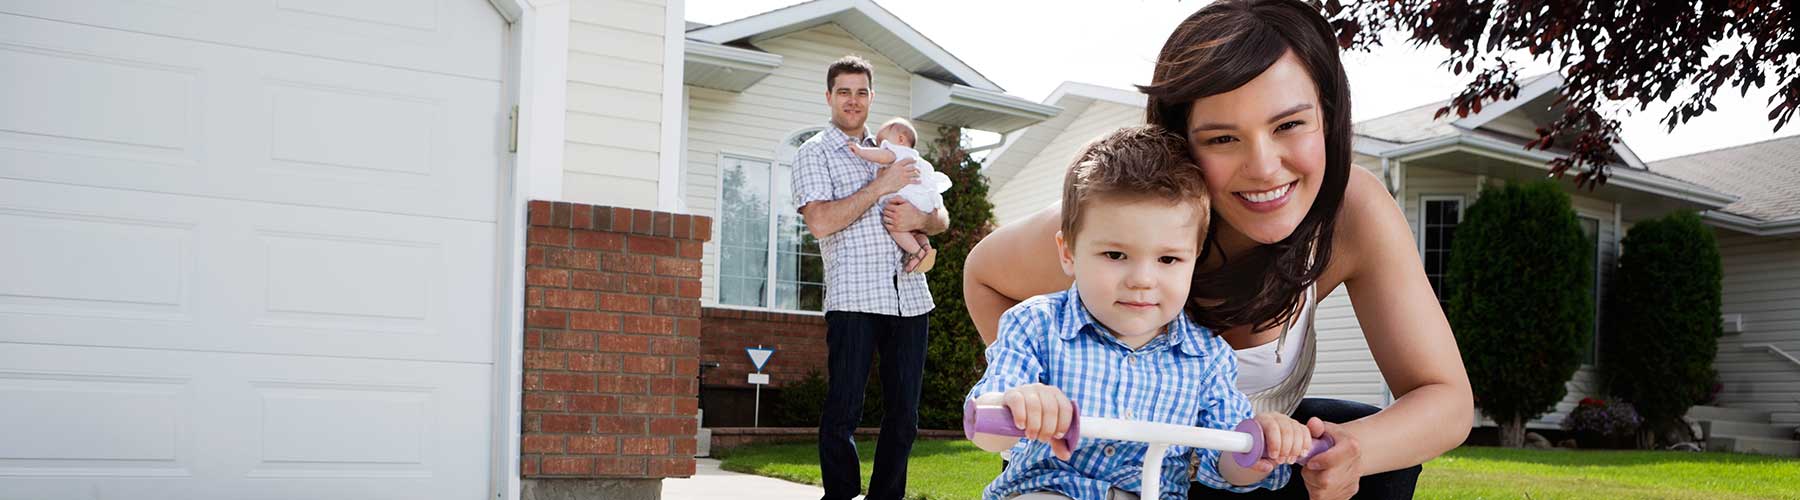 Personal insurance represented by family posing in front of their home